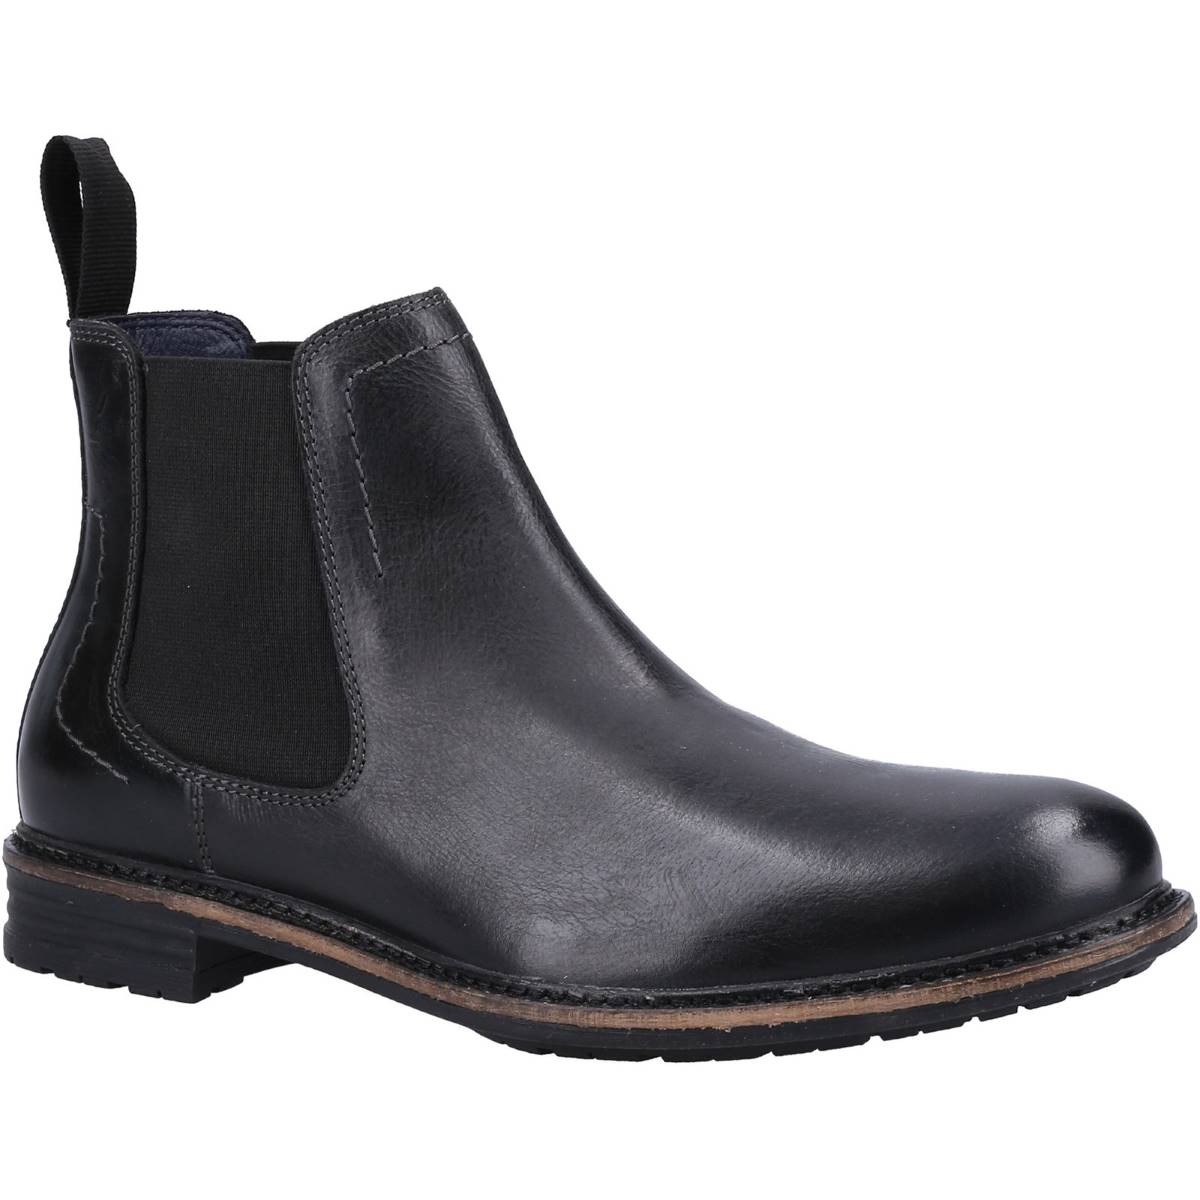 Hush Puppies Justin Chelsea Black Mens boots HP-35651-70616 in a Plain Leather in Size 10